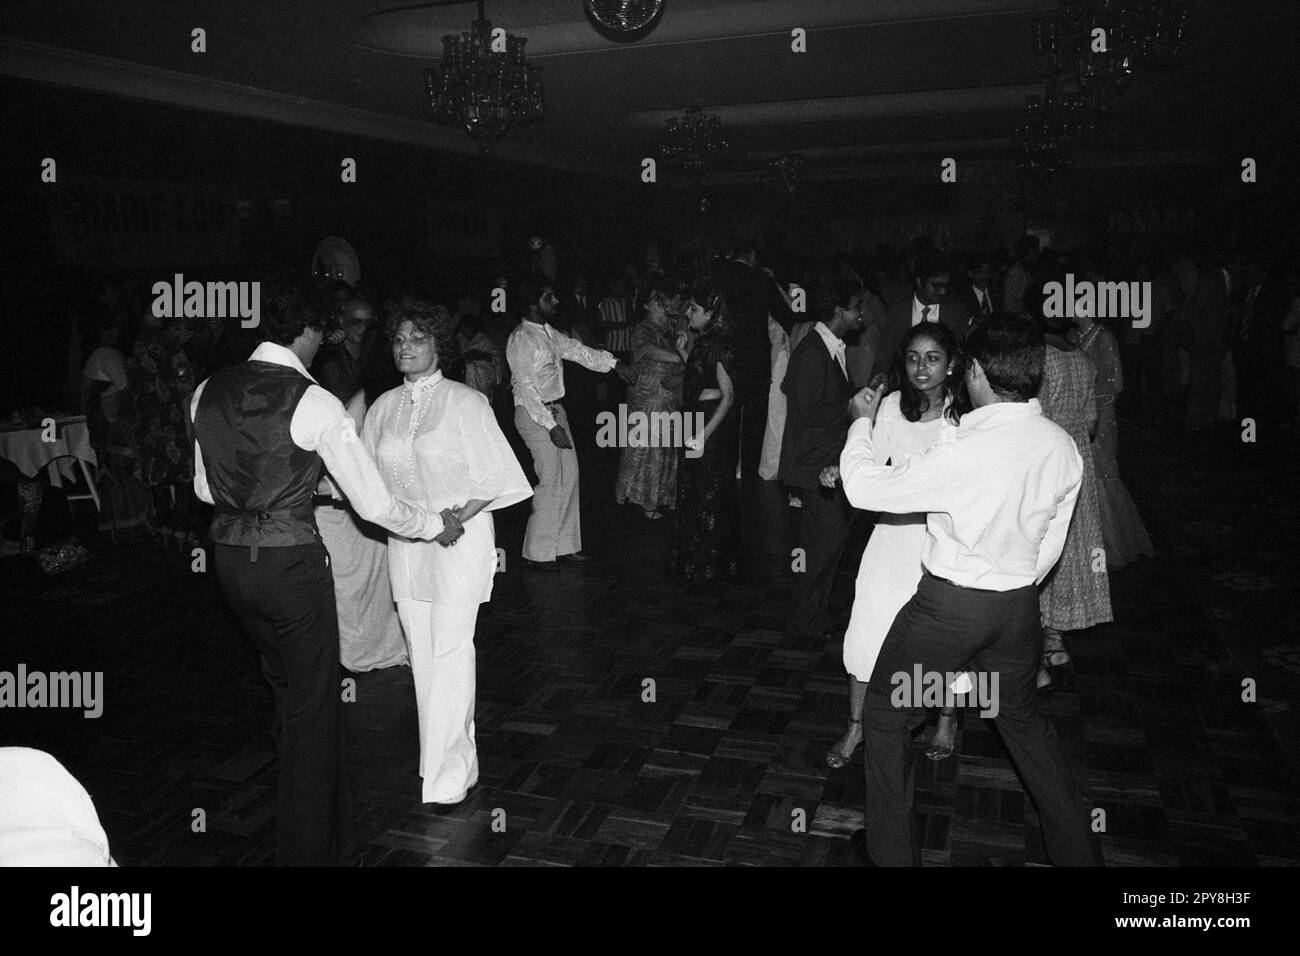 Indian old vintage 1980s black and white bollywood cinema hindi movie film actor, India, Indian bollywood dance party, India Stock Photo